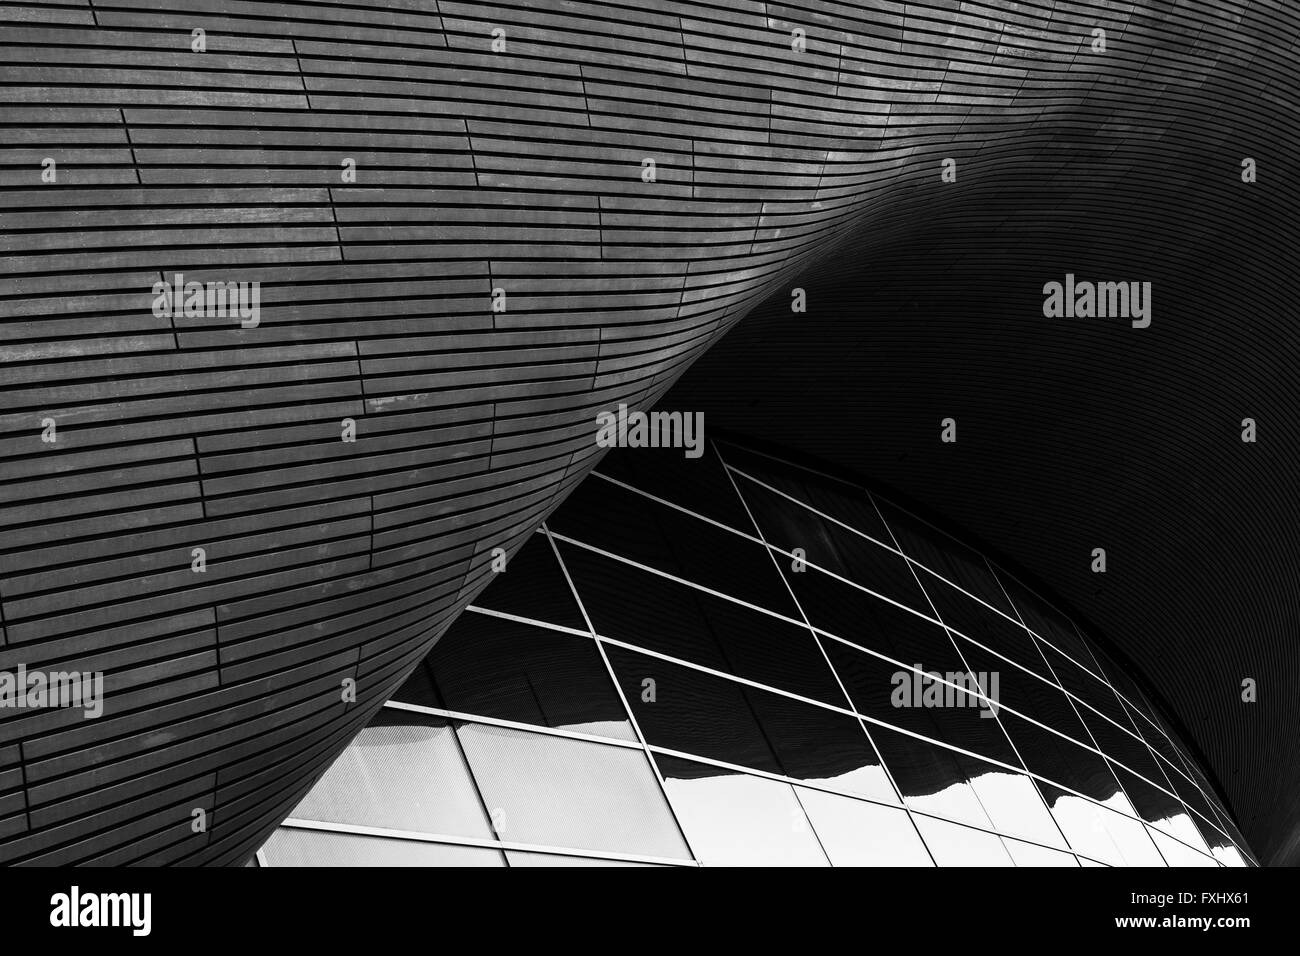 Abstract Architecture London Aquatic Center Stock Photo